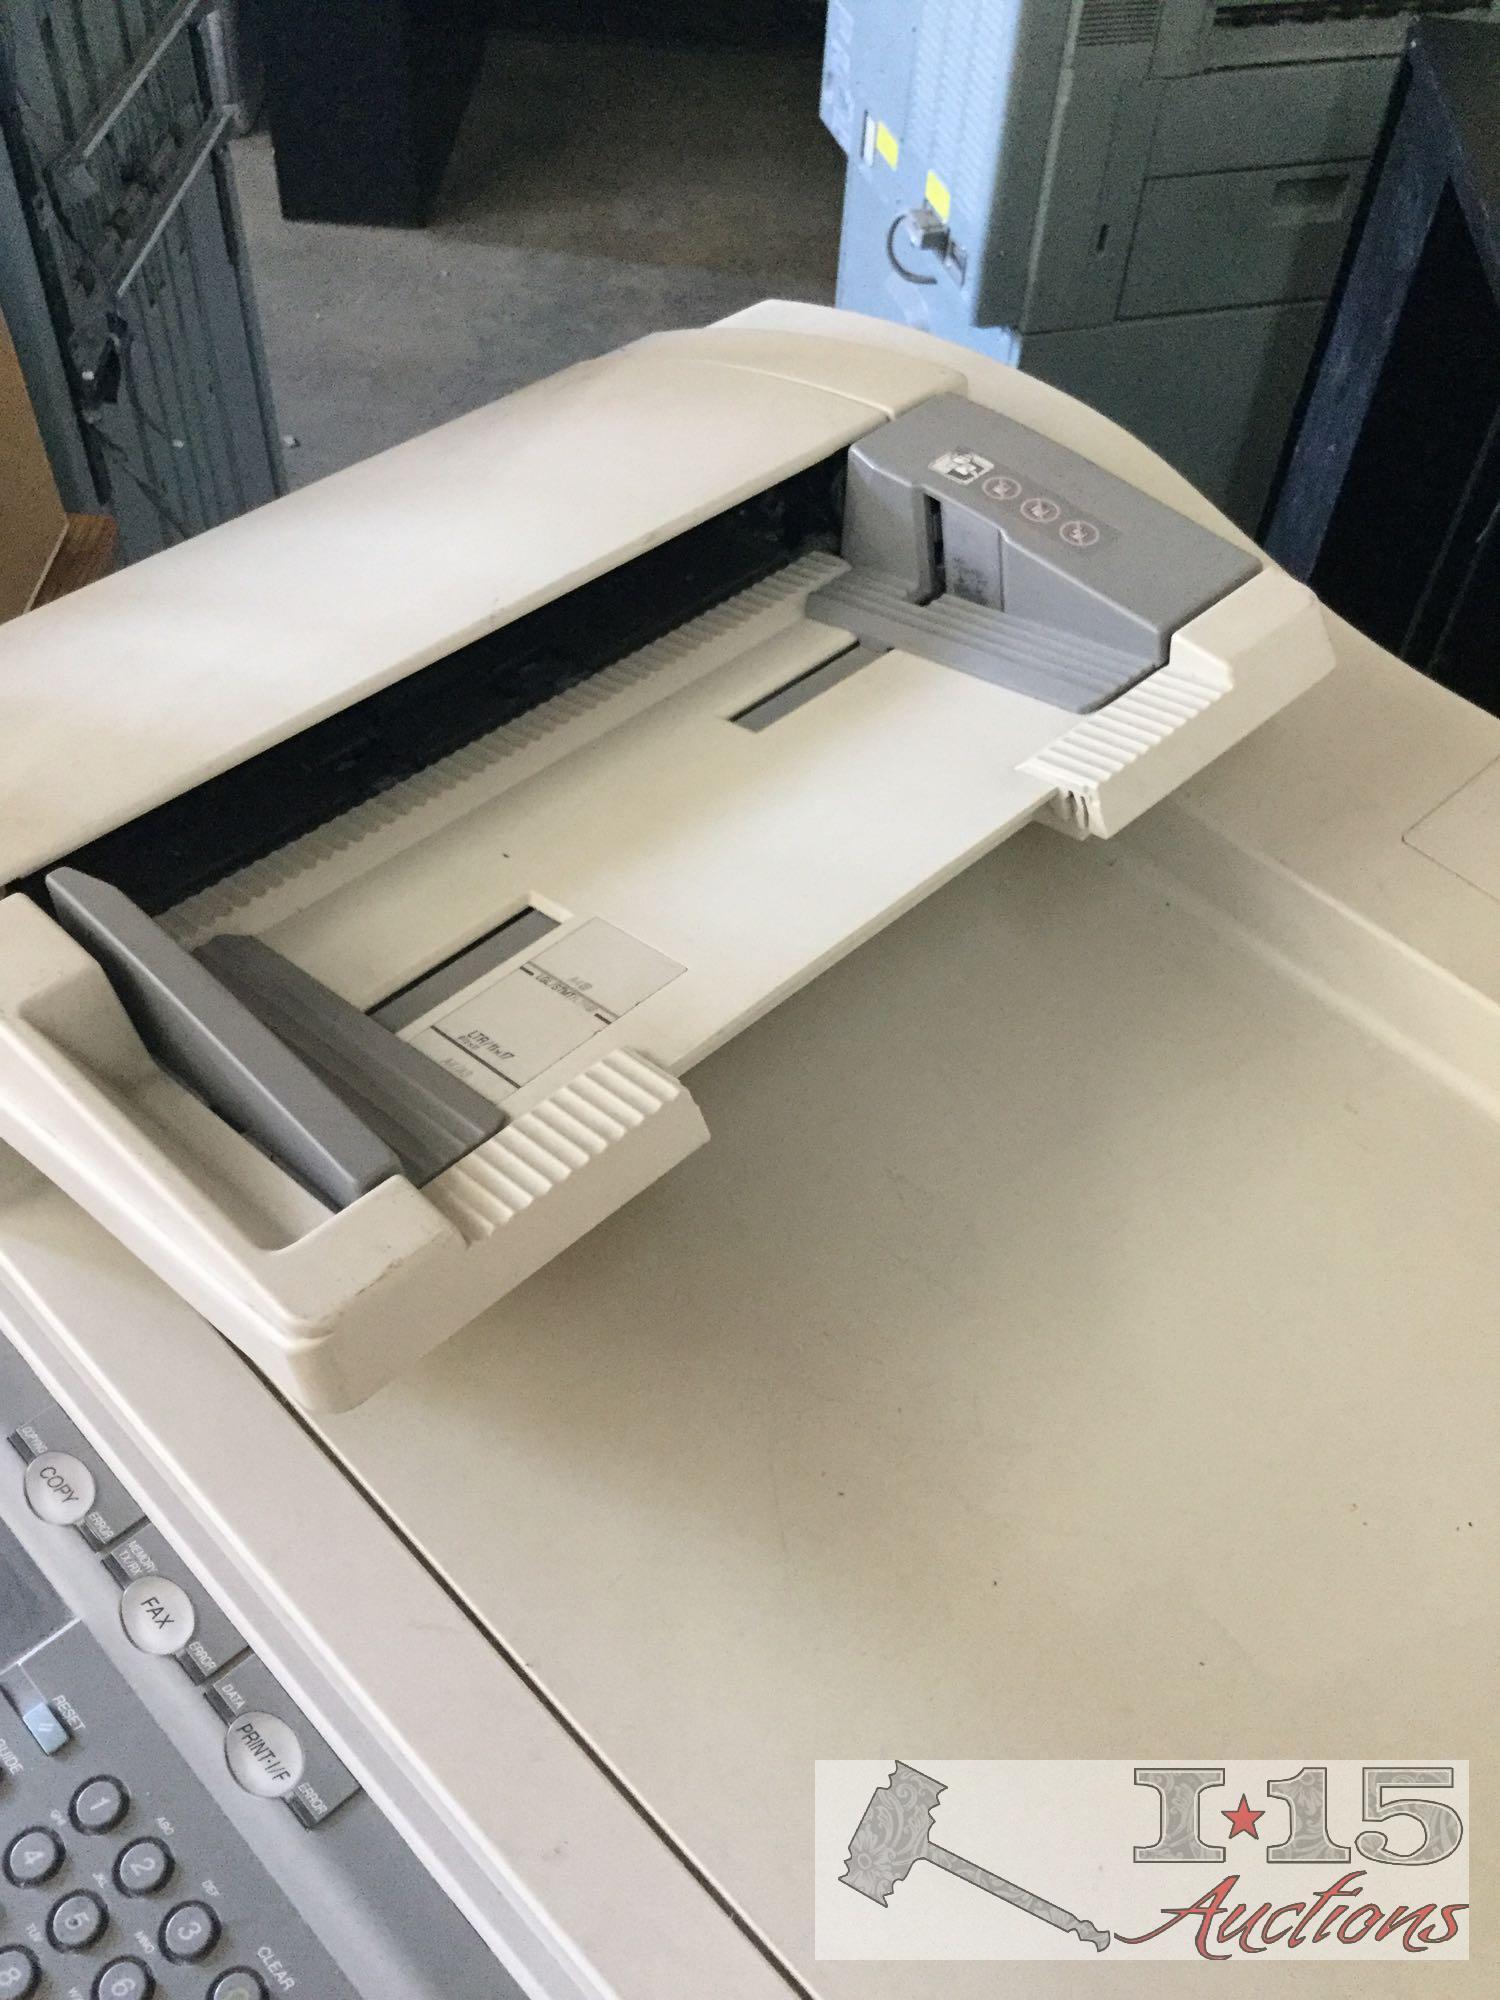 Large working Canon print, copy and fax machine